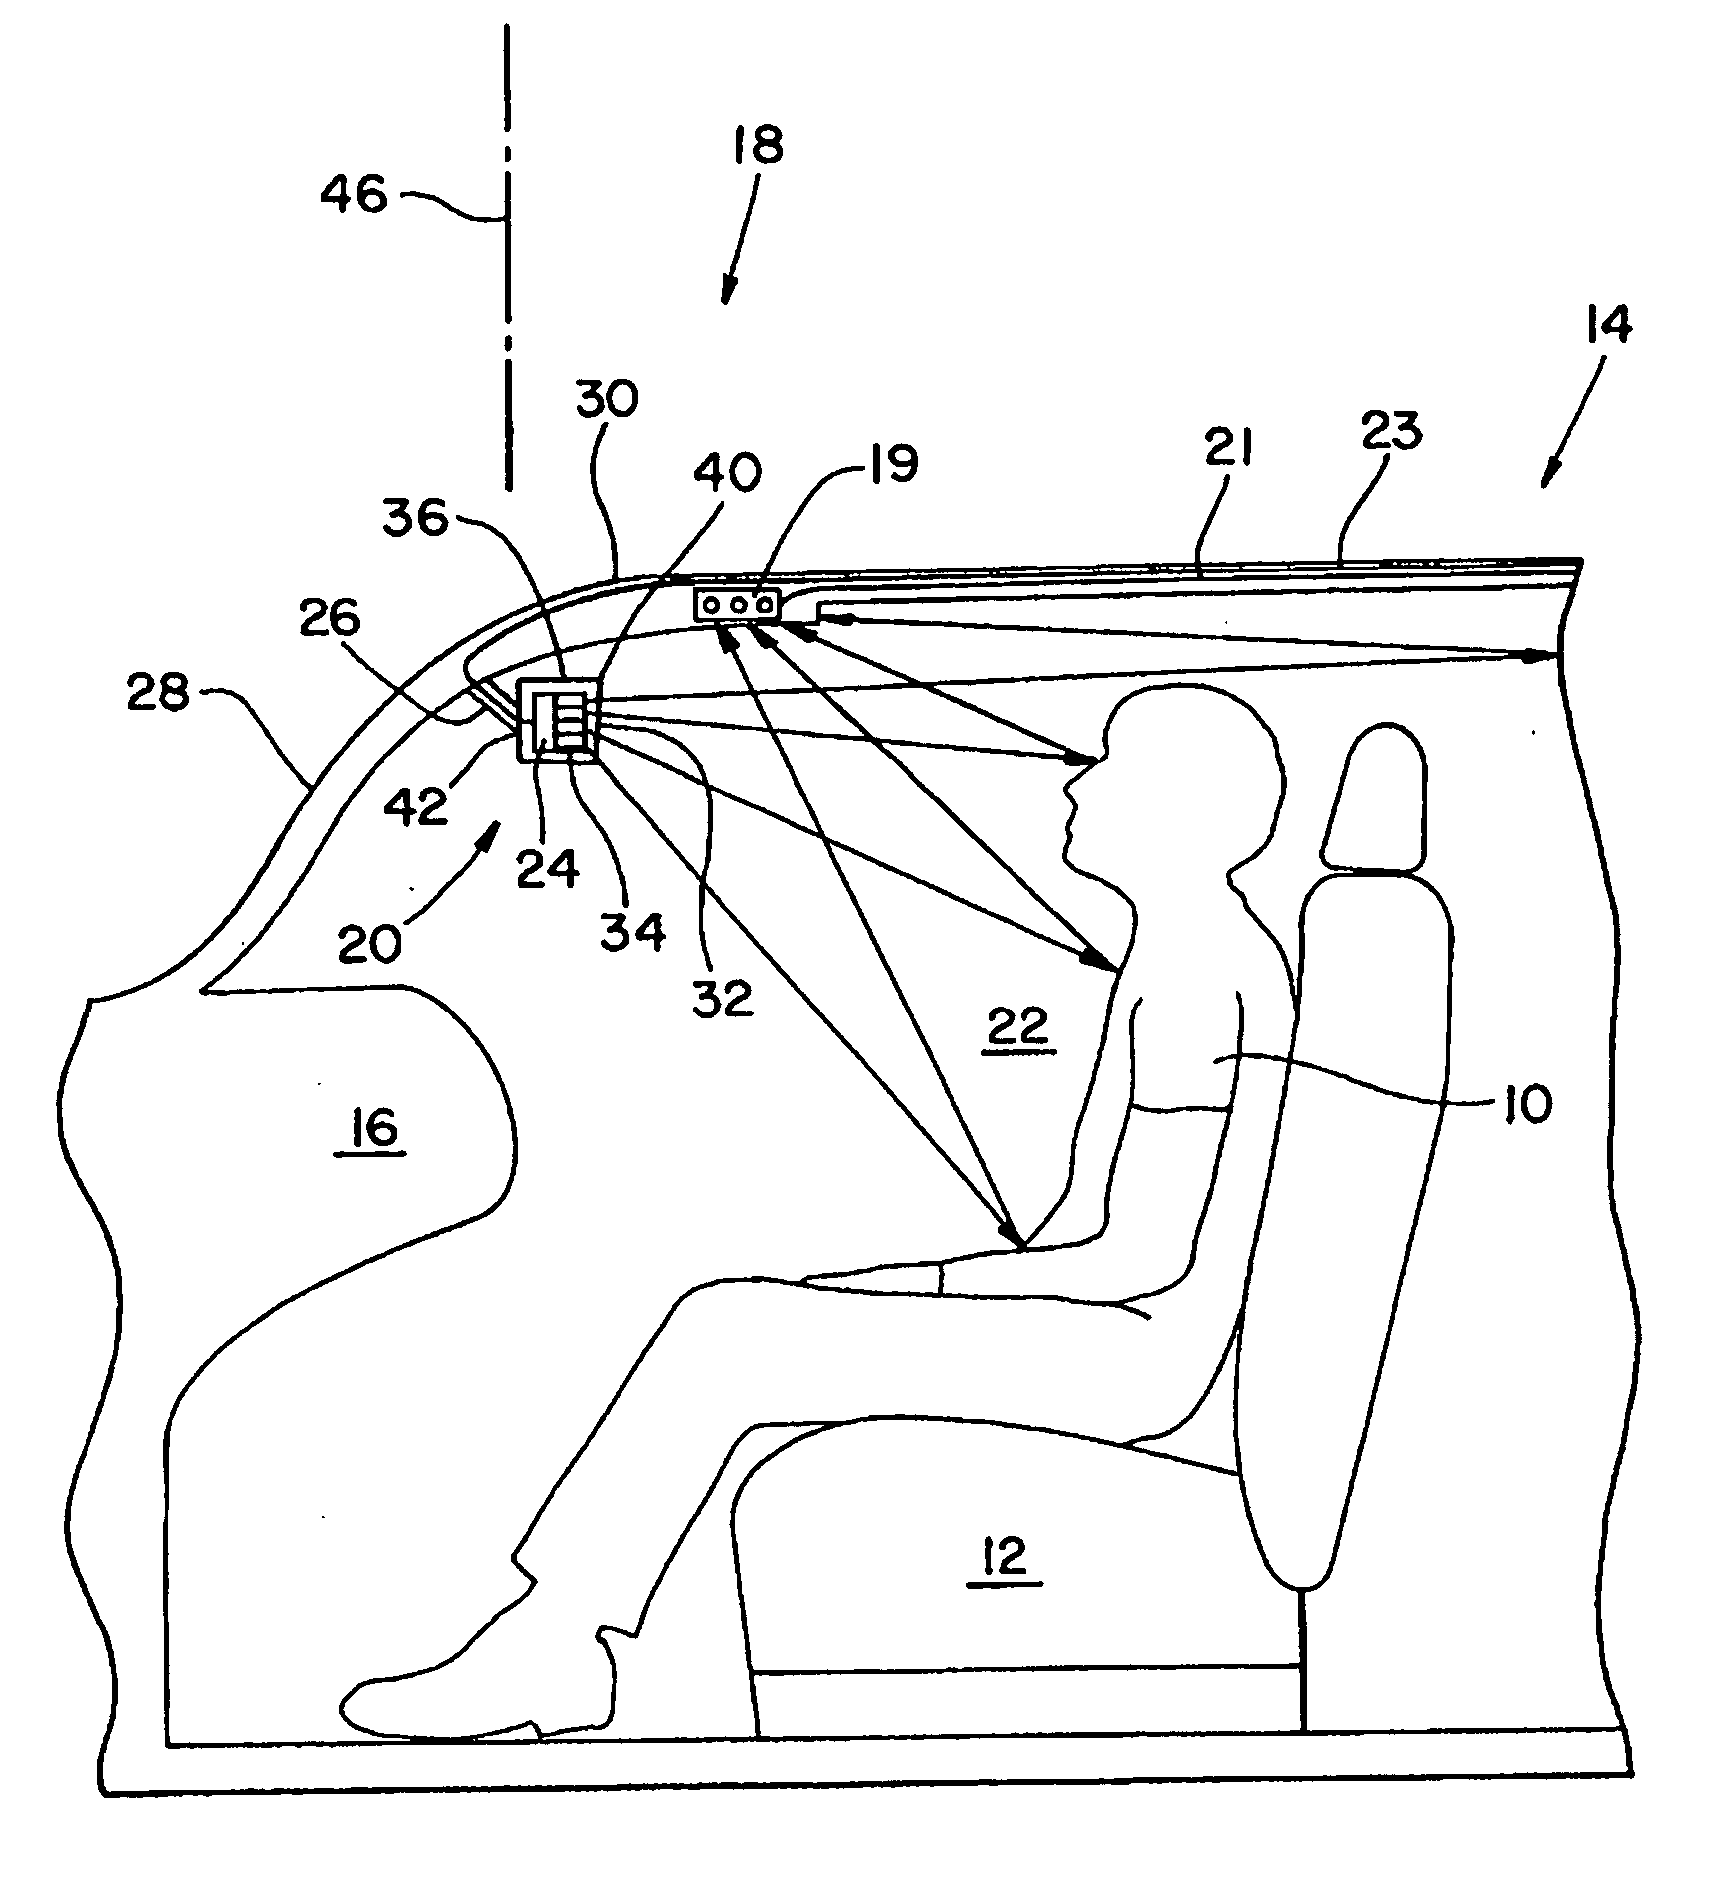 Illumination apparatus for an optical occupant monitoring system in a vehicle